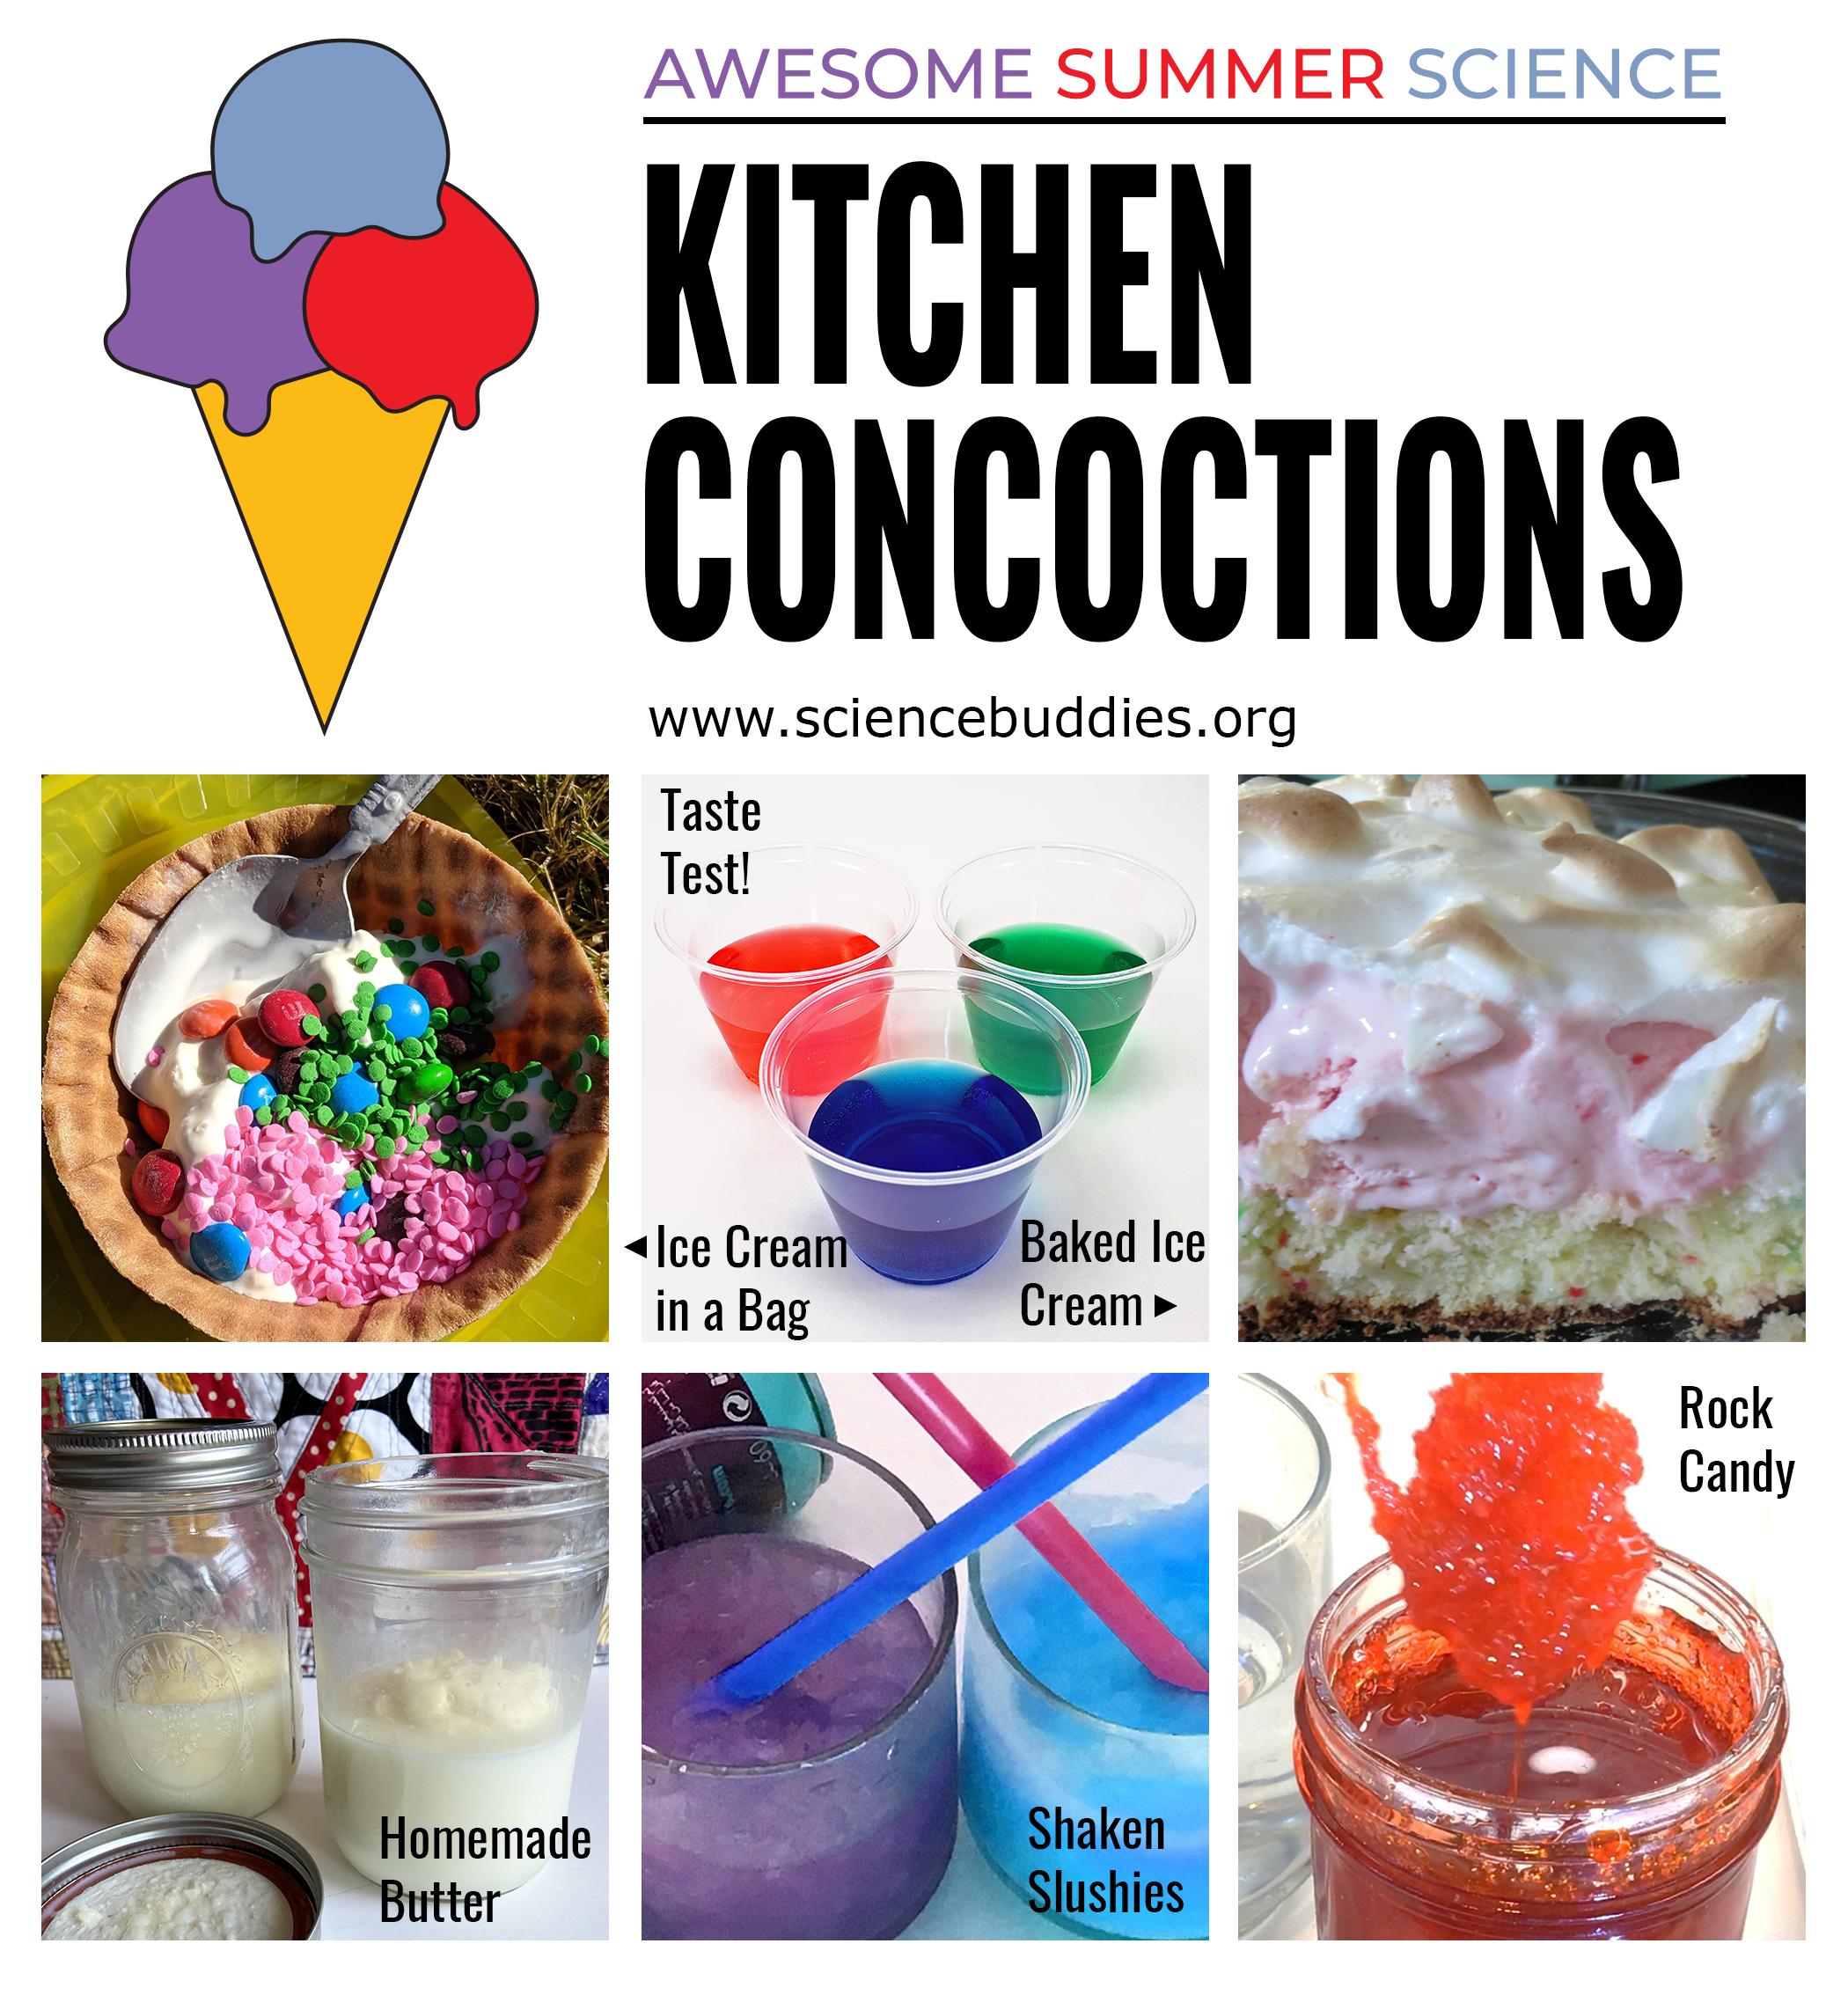 Ice cream in a bag, shaken butter in a jar, rock candy, slushies in a bag, and a taste test experiment for Kitchen Concoctions - Week 2 of Awesome Summer Science Experiments with Science Buddies